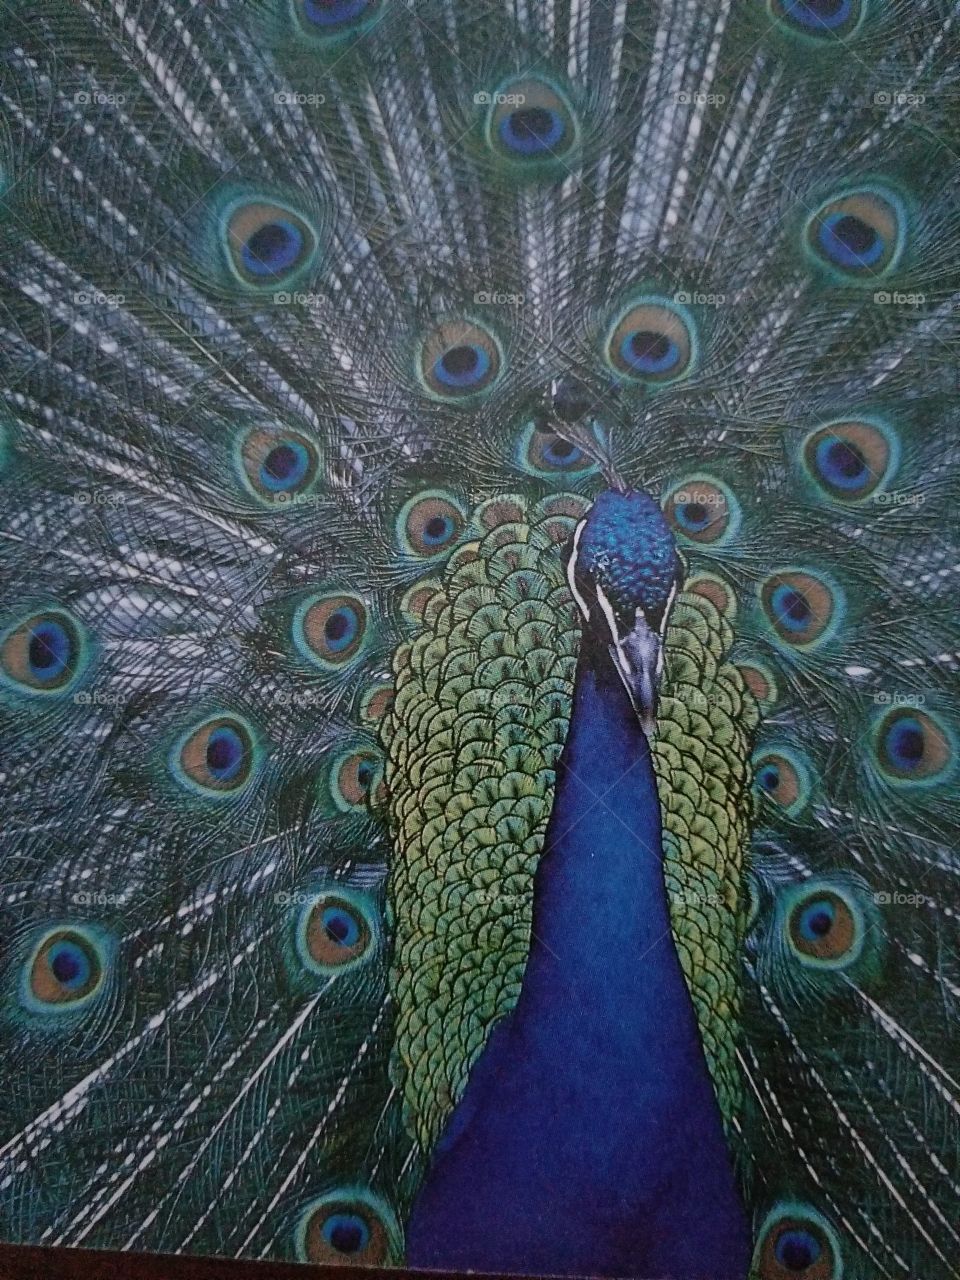 I was drawn to photograph this beautiful peacock by its symmetry, along with the iridescence of its colors. Still, the image is not perfectly symmerical, because I didnt want to lose the bird's form by photographing it straight on.